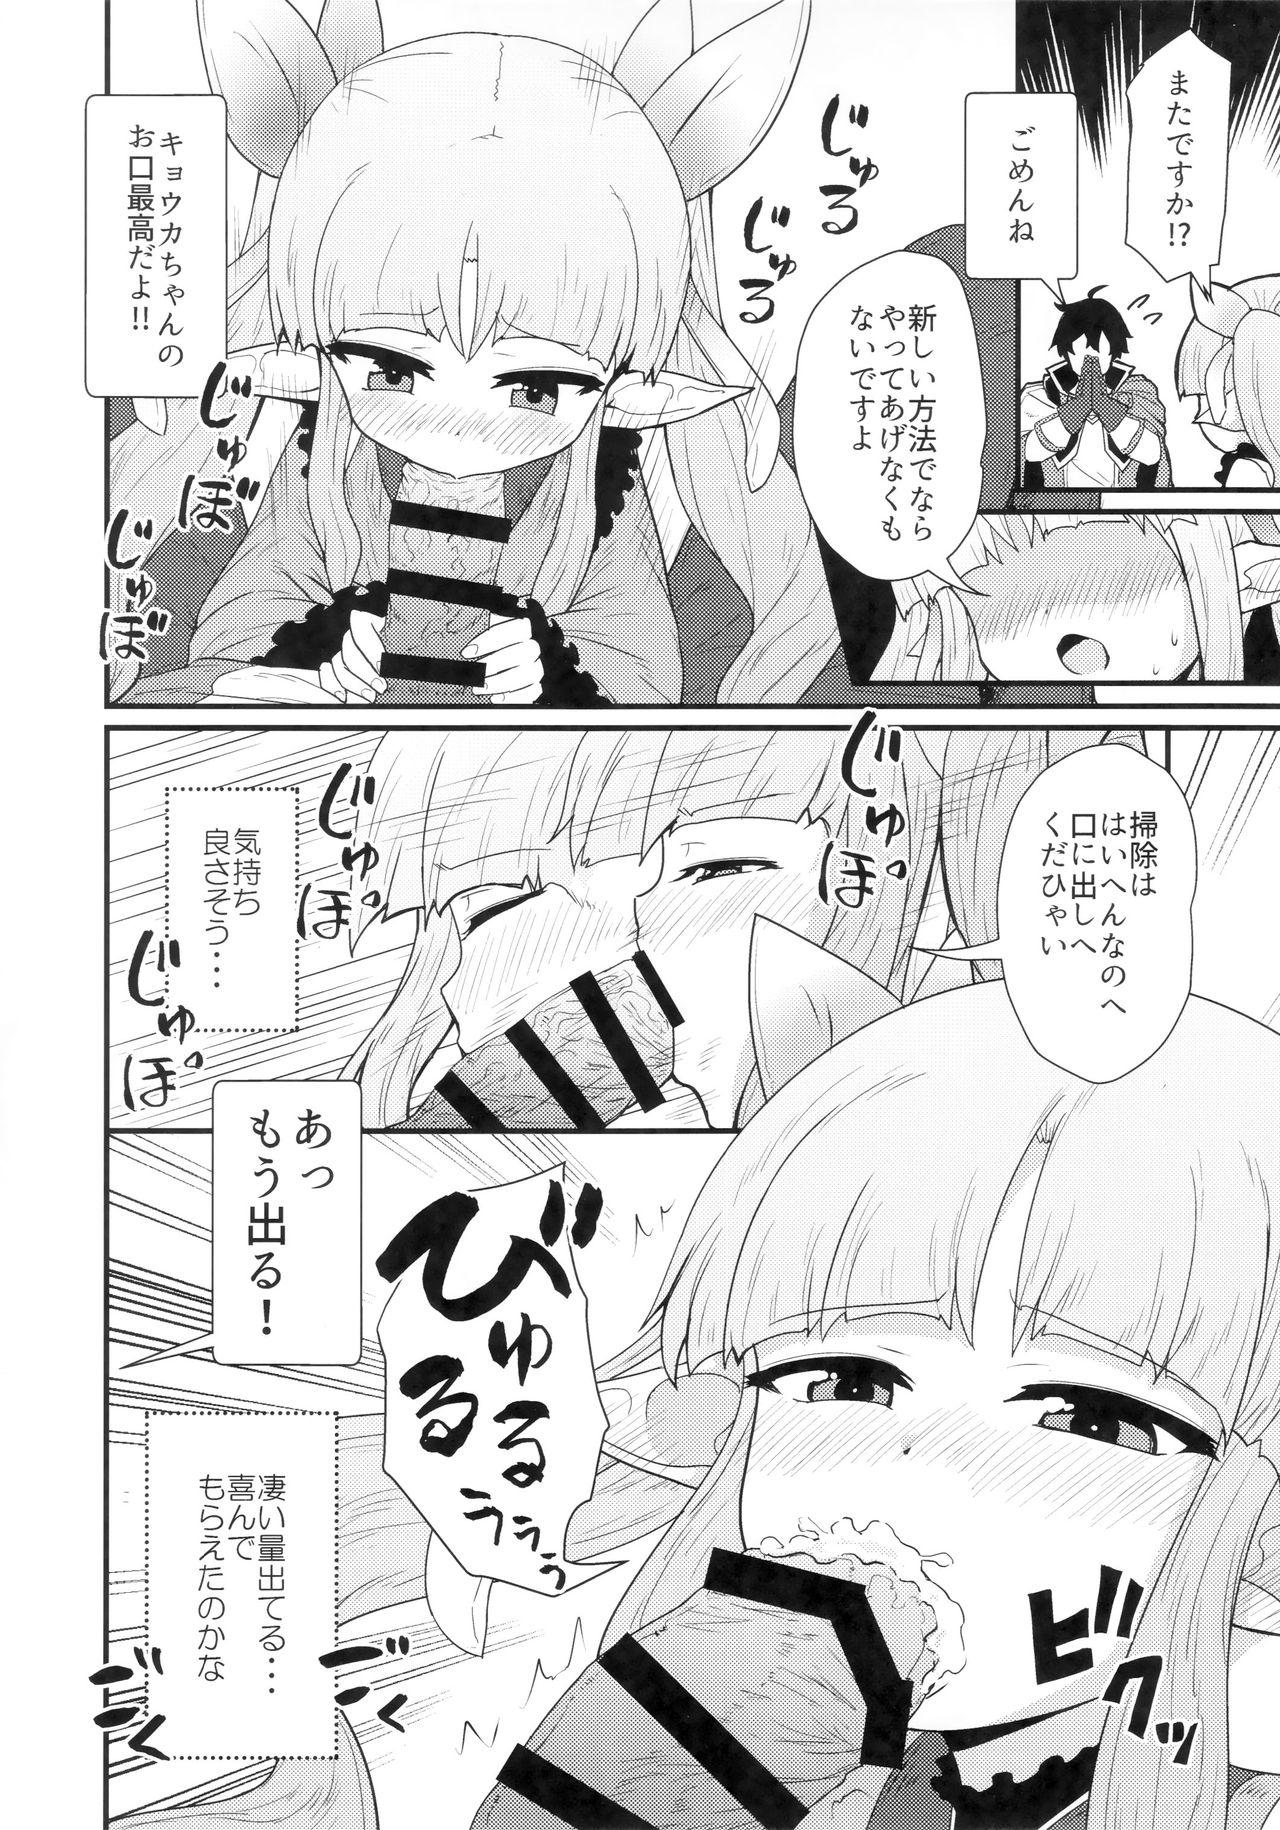 Action Onegai Kyouka-chan - Princess connect Transexual - Page 7